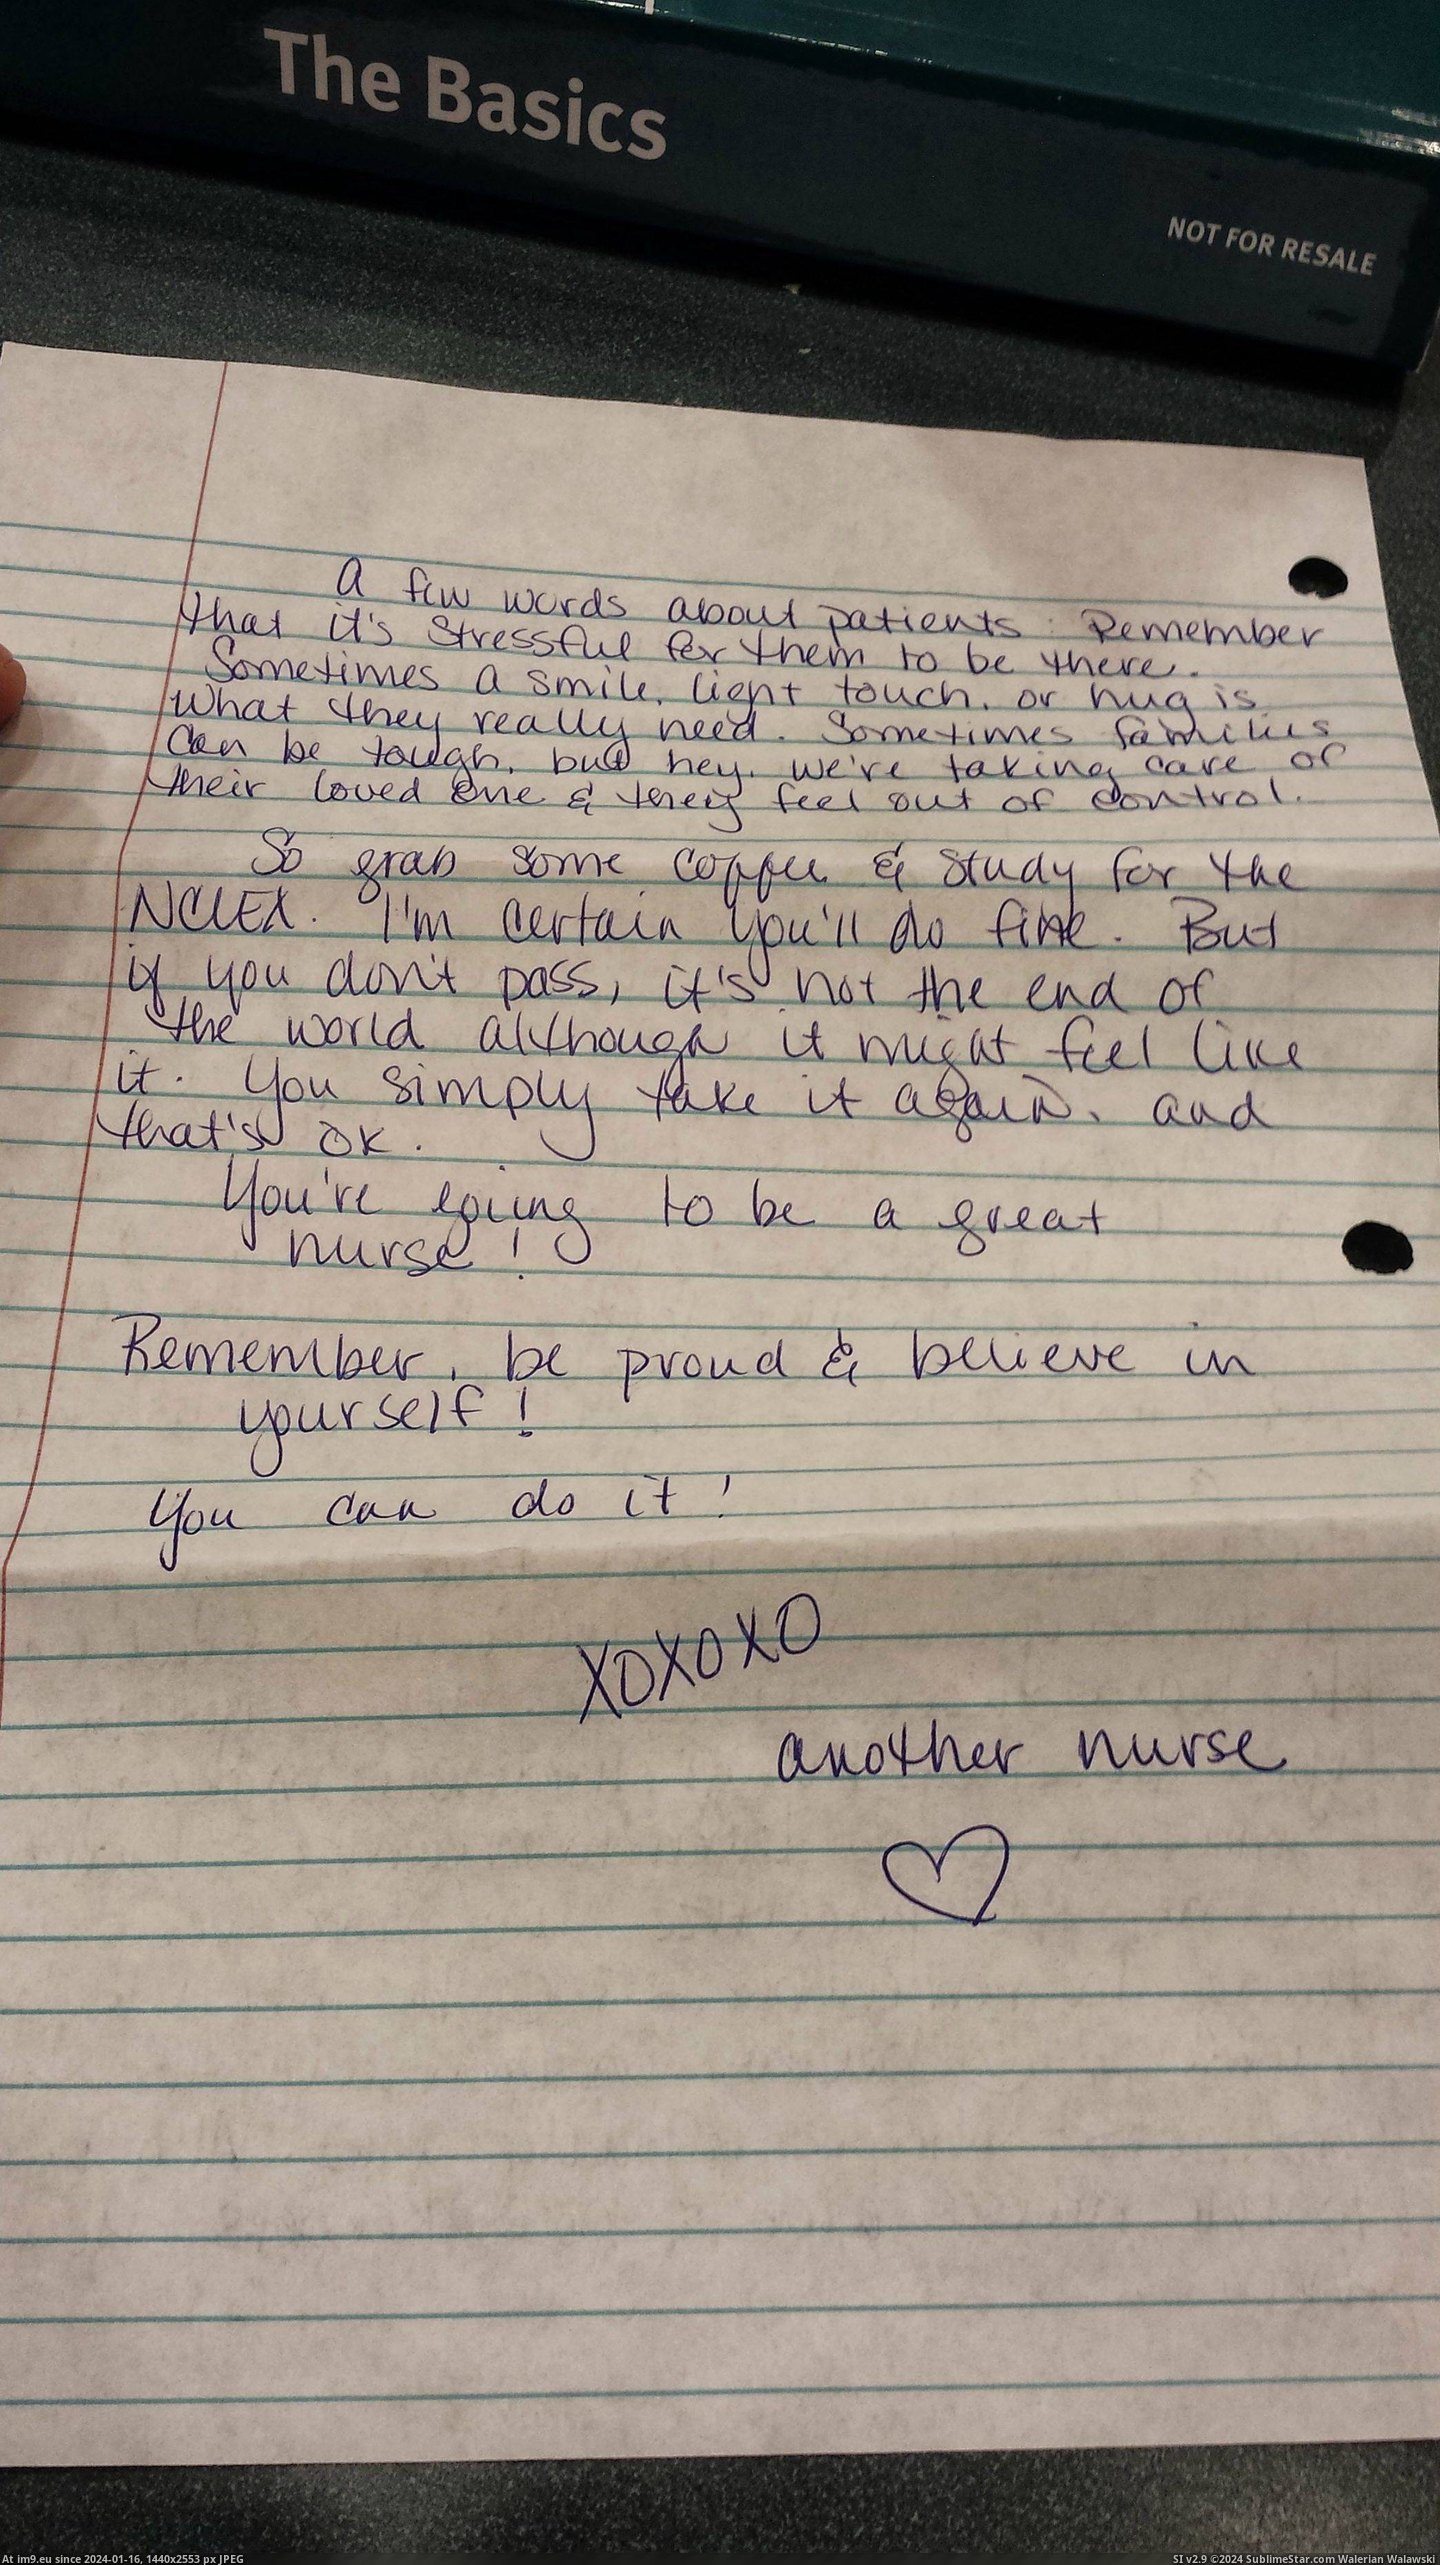 #For #Girlfriend #Book #Envelope #Nursing #Tucked #Exam #Studying #License [Pics] My girlfriend is studying for her nursing license exam and found this envelope tucked in a book at B&amp;N [X-post fr Pic. (Изображение из альбом My r/PICS favs))